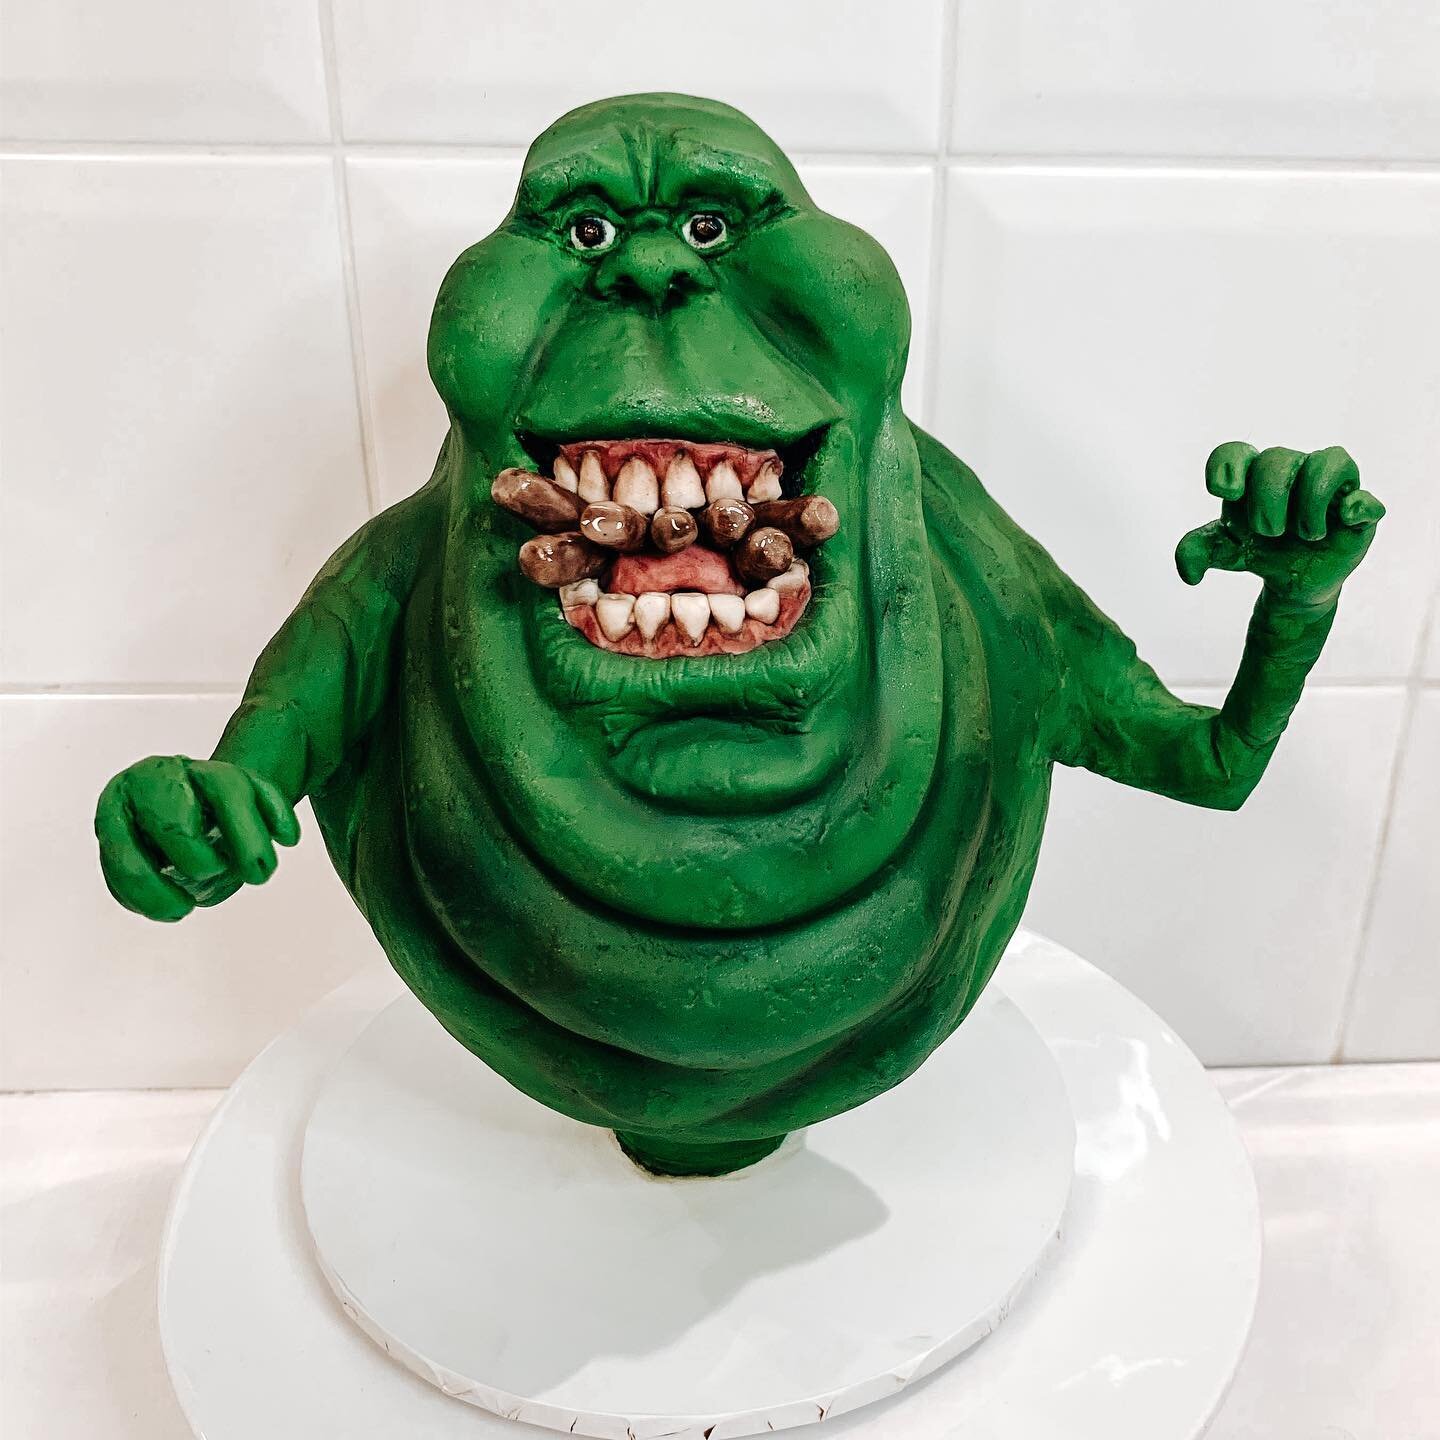 WEEK 4  SPOOKY CAKE COMP!

An 80’s throwback as promised and one of my favourite movies as a kid 👻

I present to you the final cake 

#SLIMER from #Ghostbusters 

I threw out 3 clues with lines from the movie 🎥 but no one picked up on them 🤣

Anno